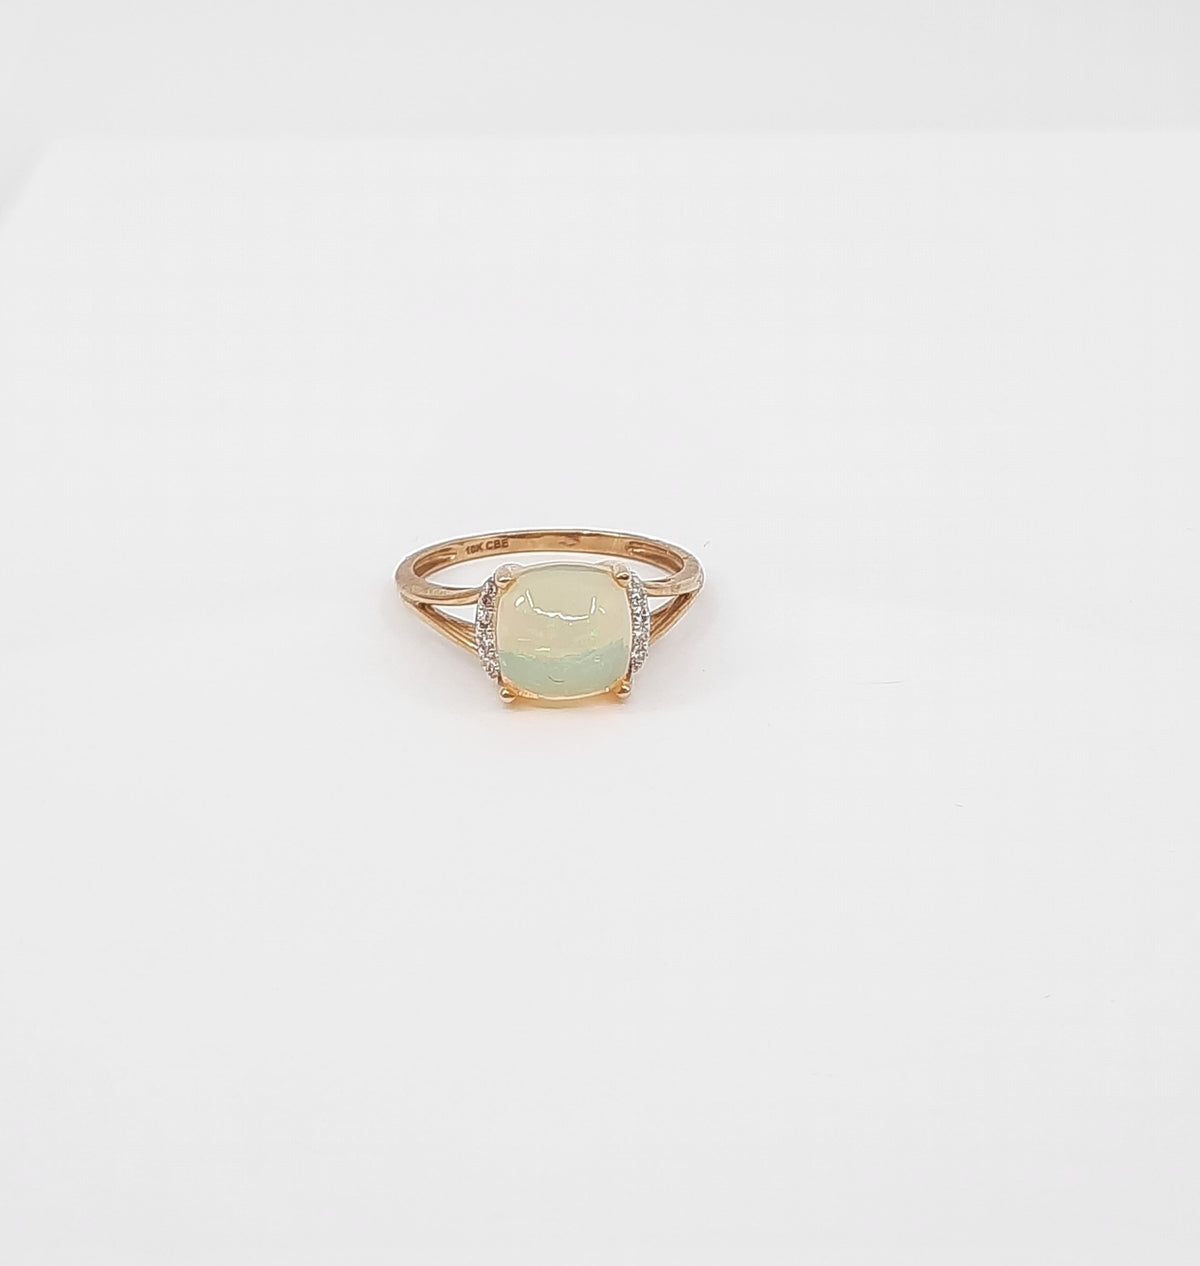 10K Yellow Gold 8 x 8mm Opal Cobochon and 0.04cttw Diamond Ring